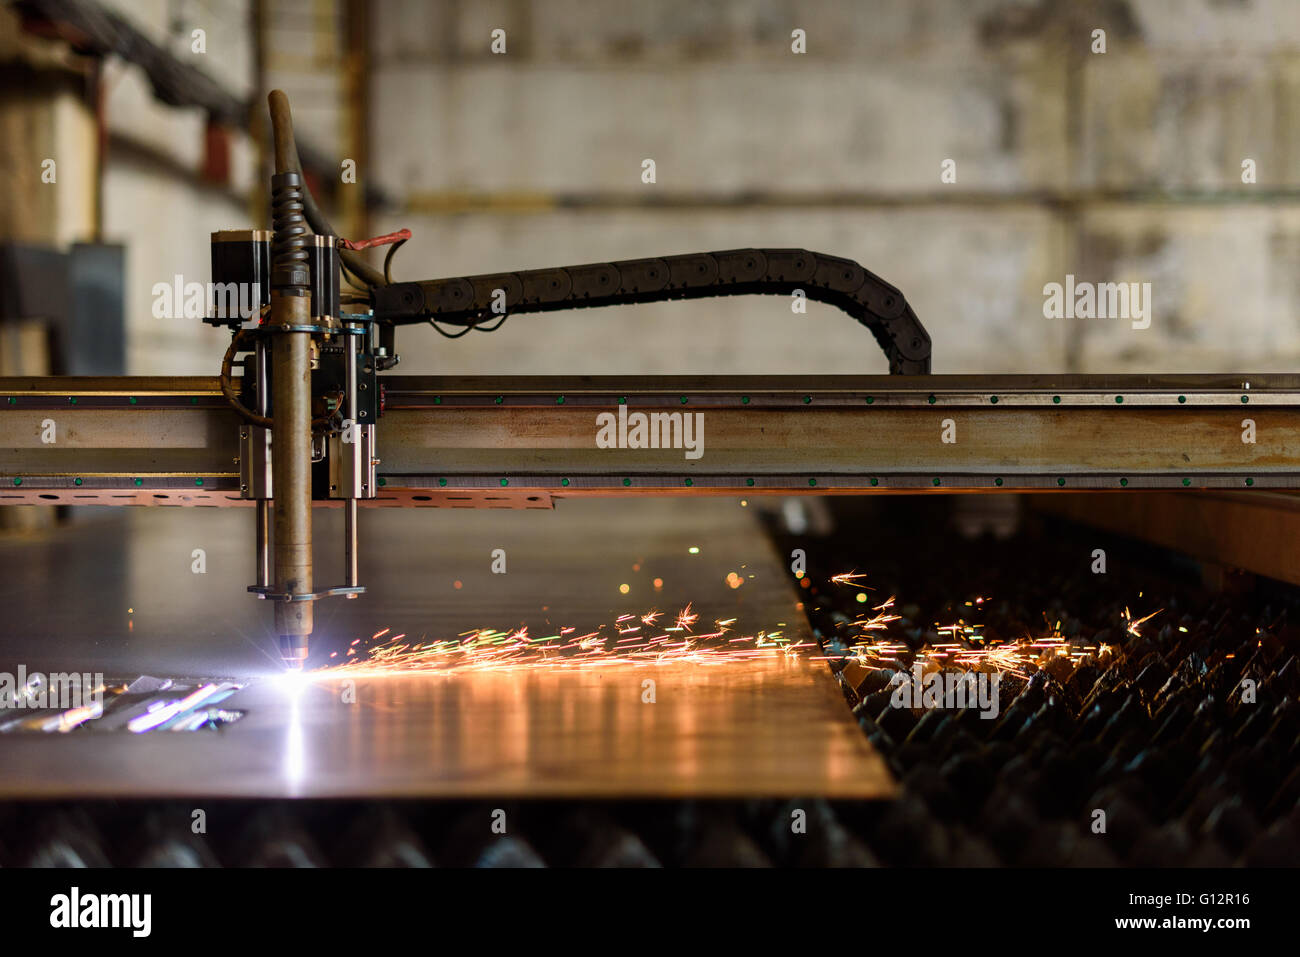 Welding device cutting plate on the heavy industry plant Stock Photo